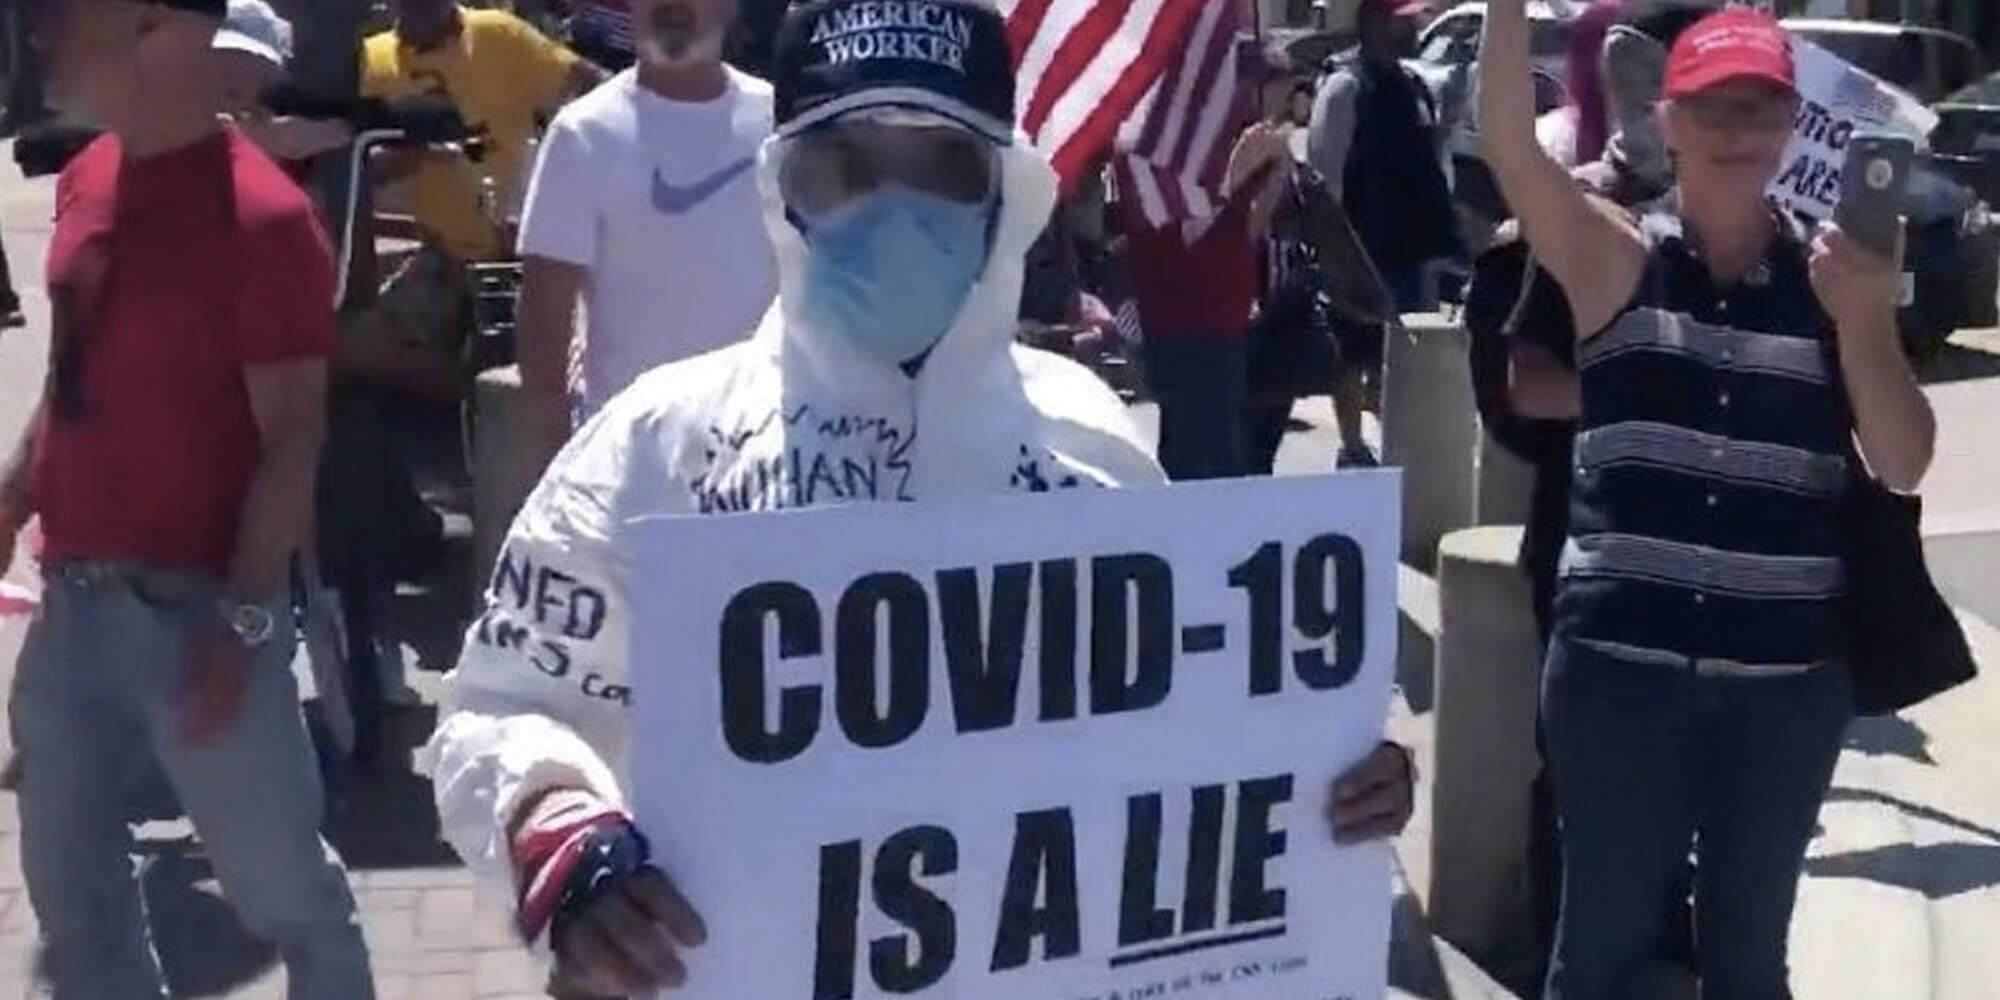 Protester Wearing Protective Gear Spotted With 'COVID-19 Is a Lie' Sign